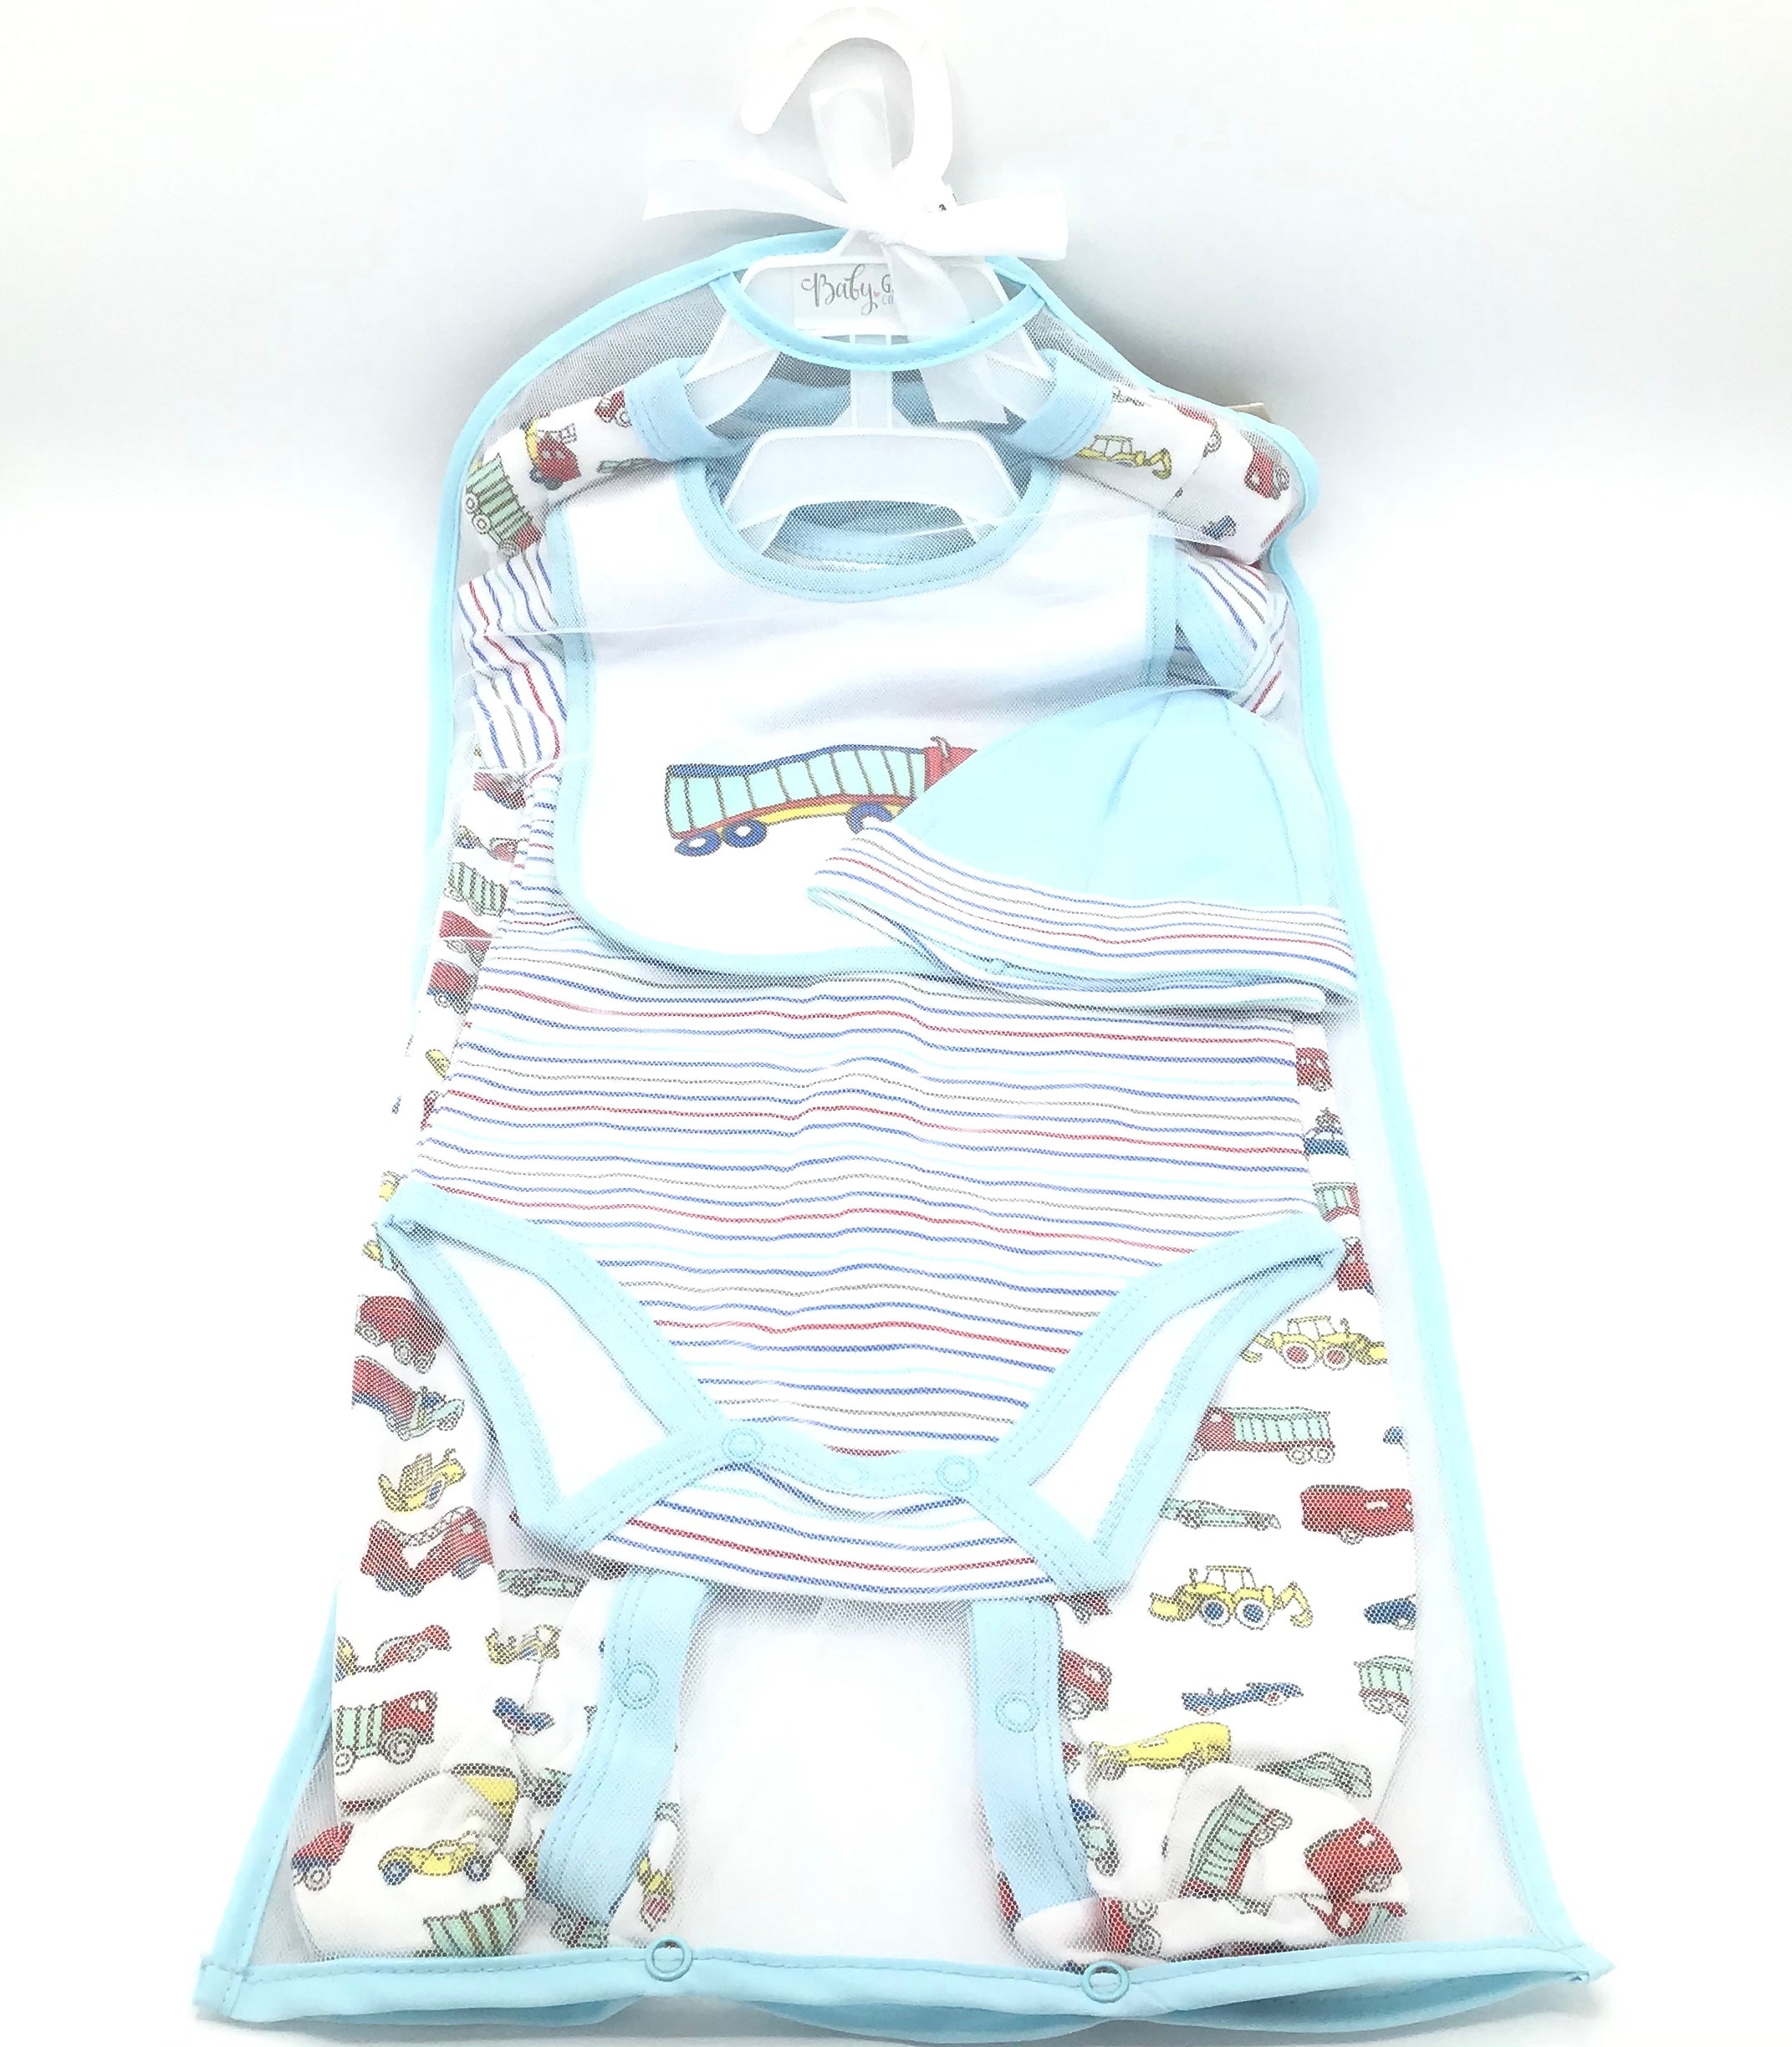 Four piece layette set with trucks.